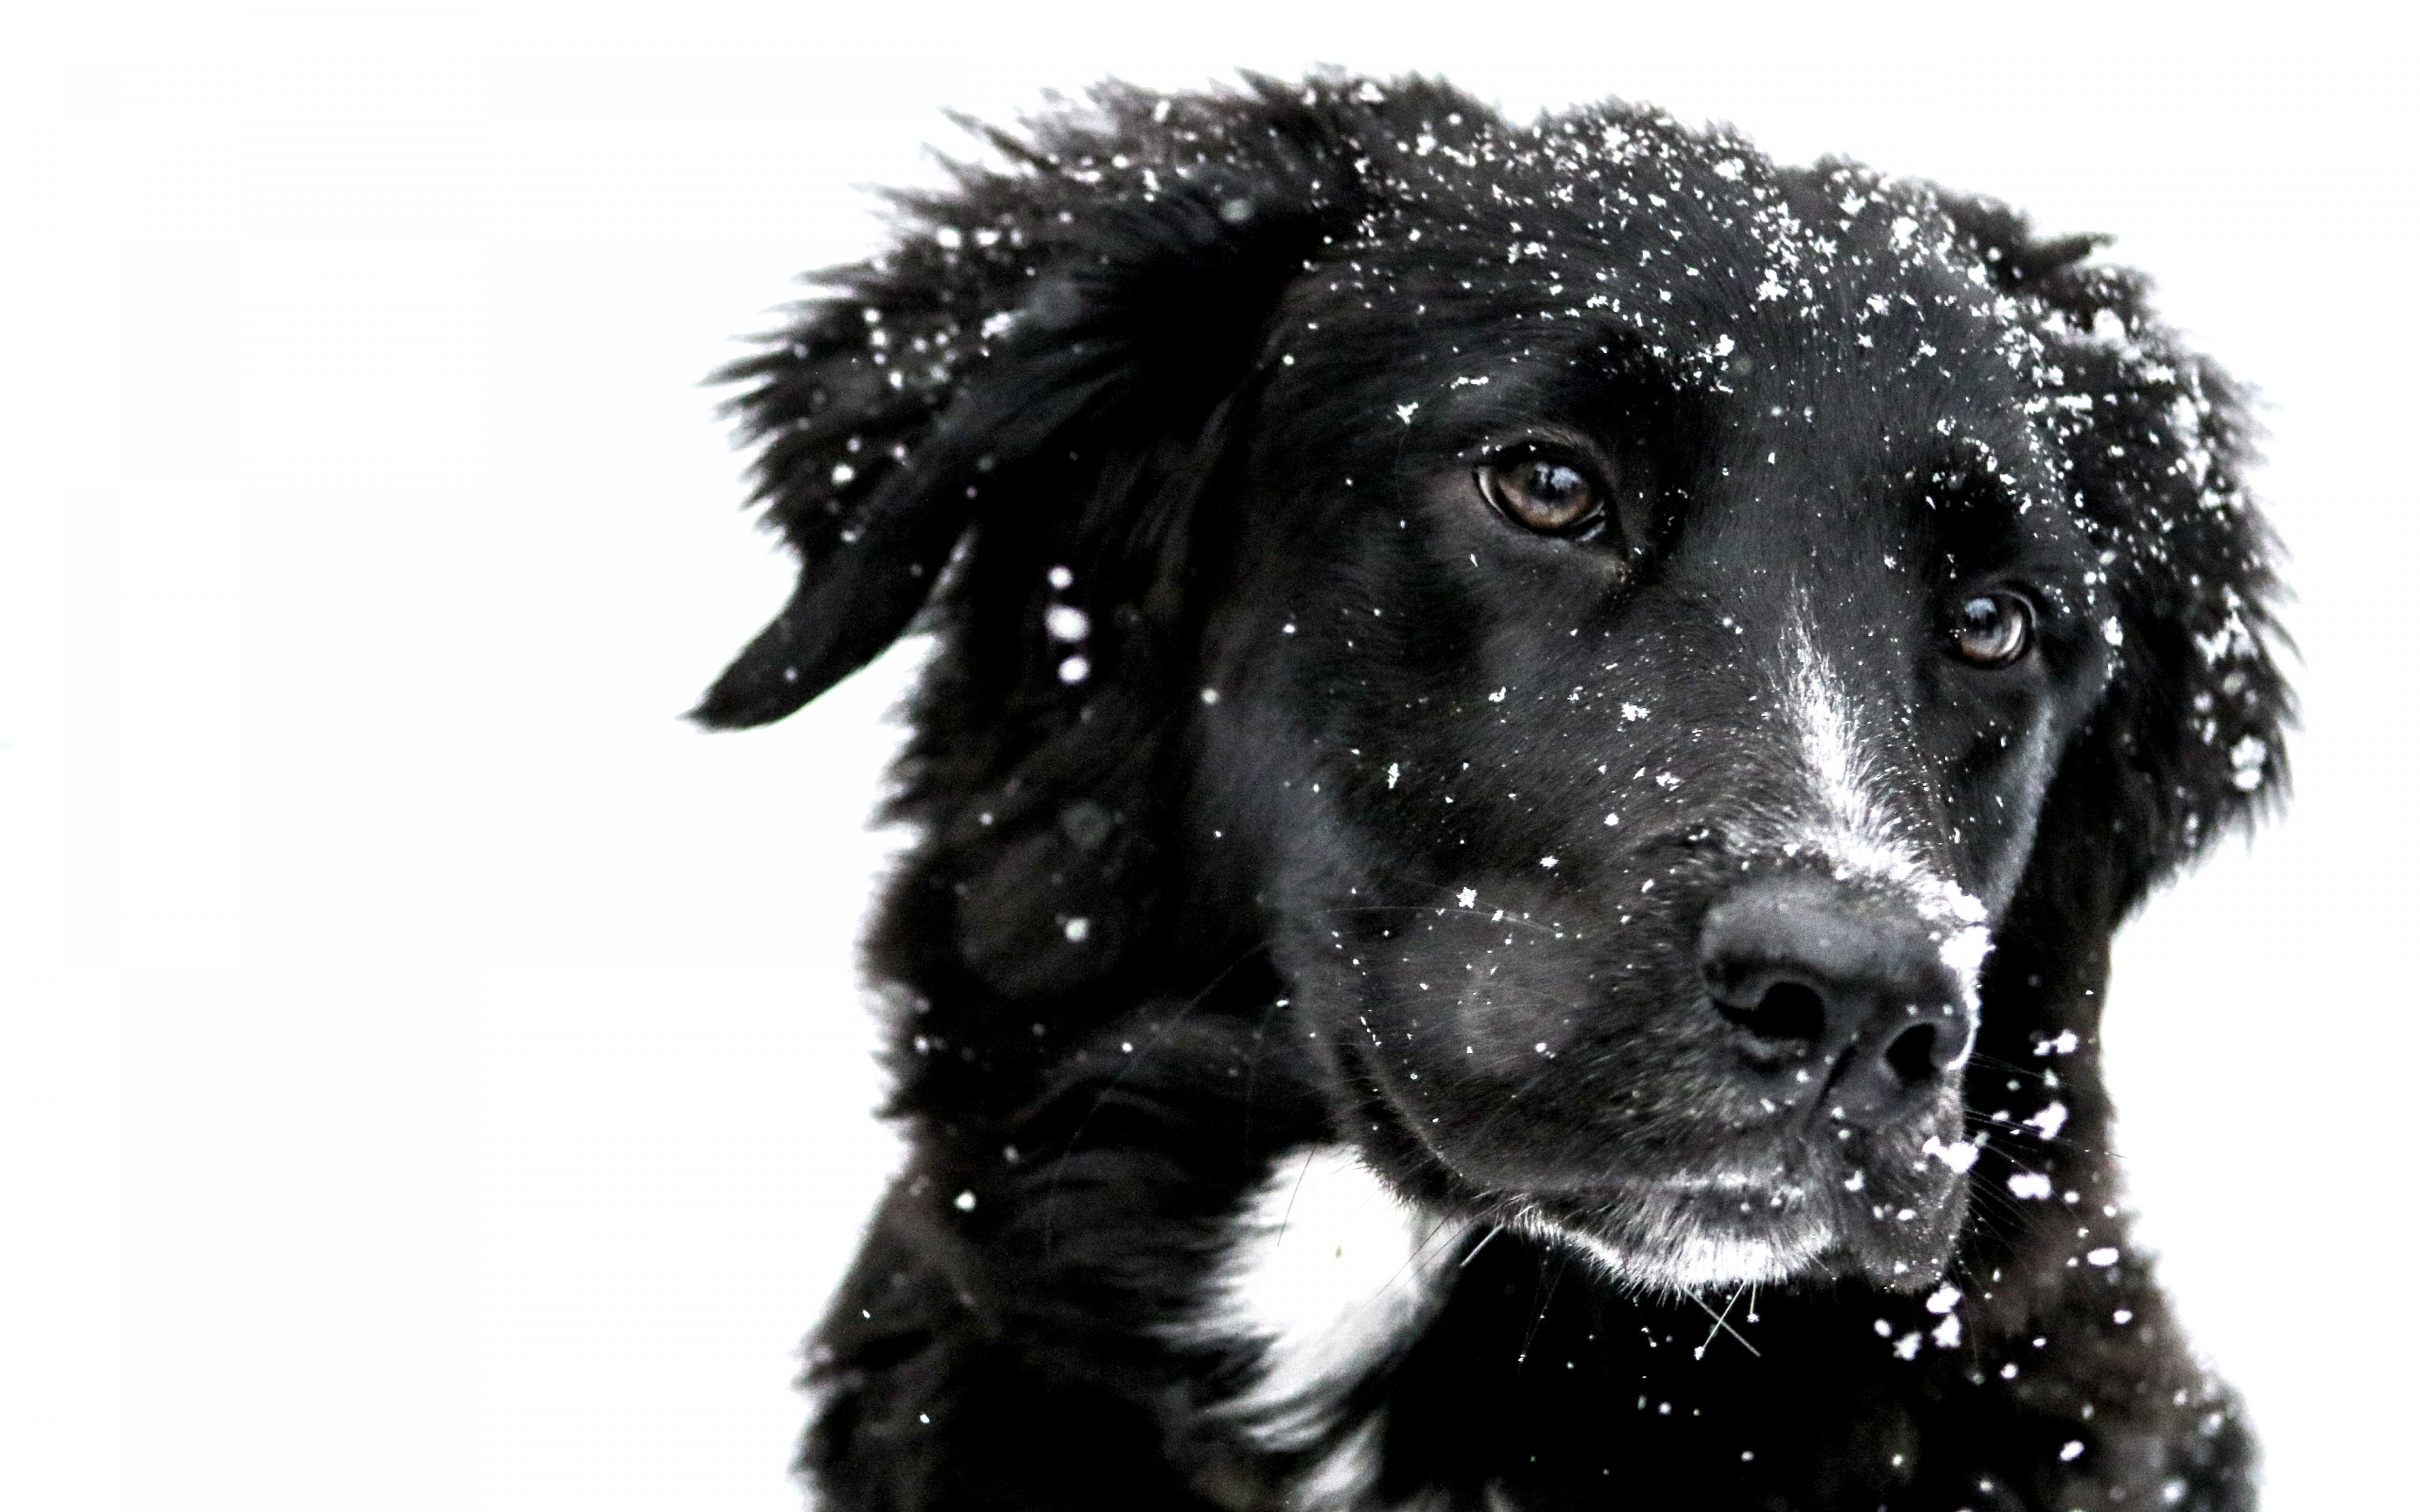 Snowing over the cute dog wallpaper 3840x2400